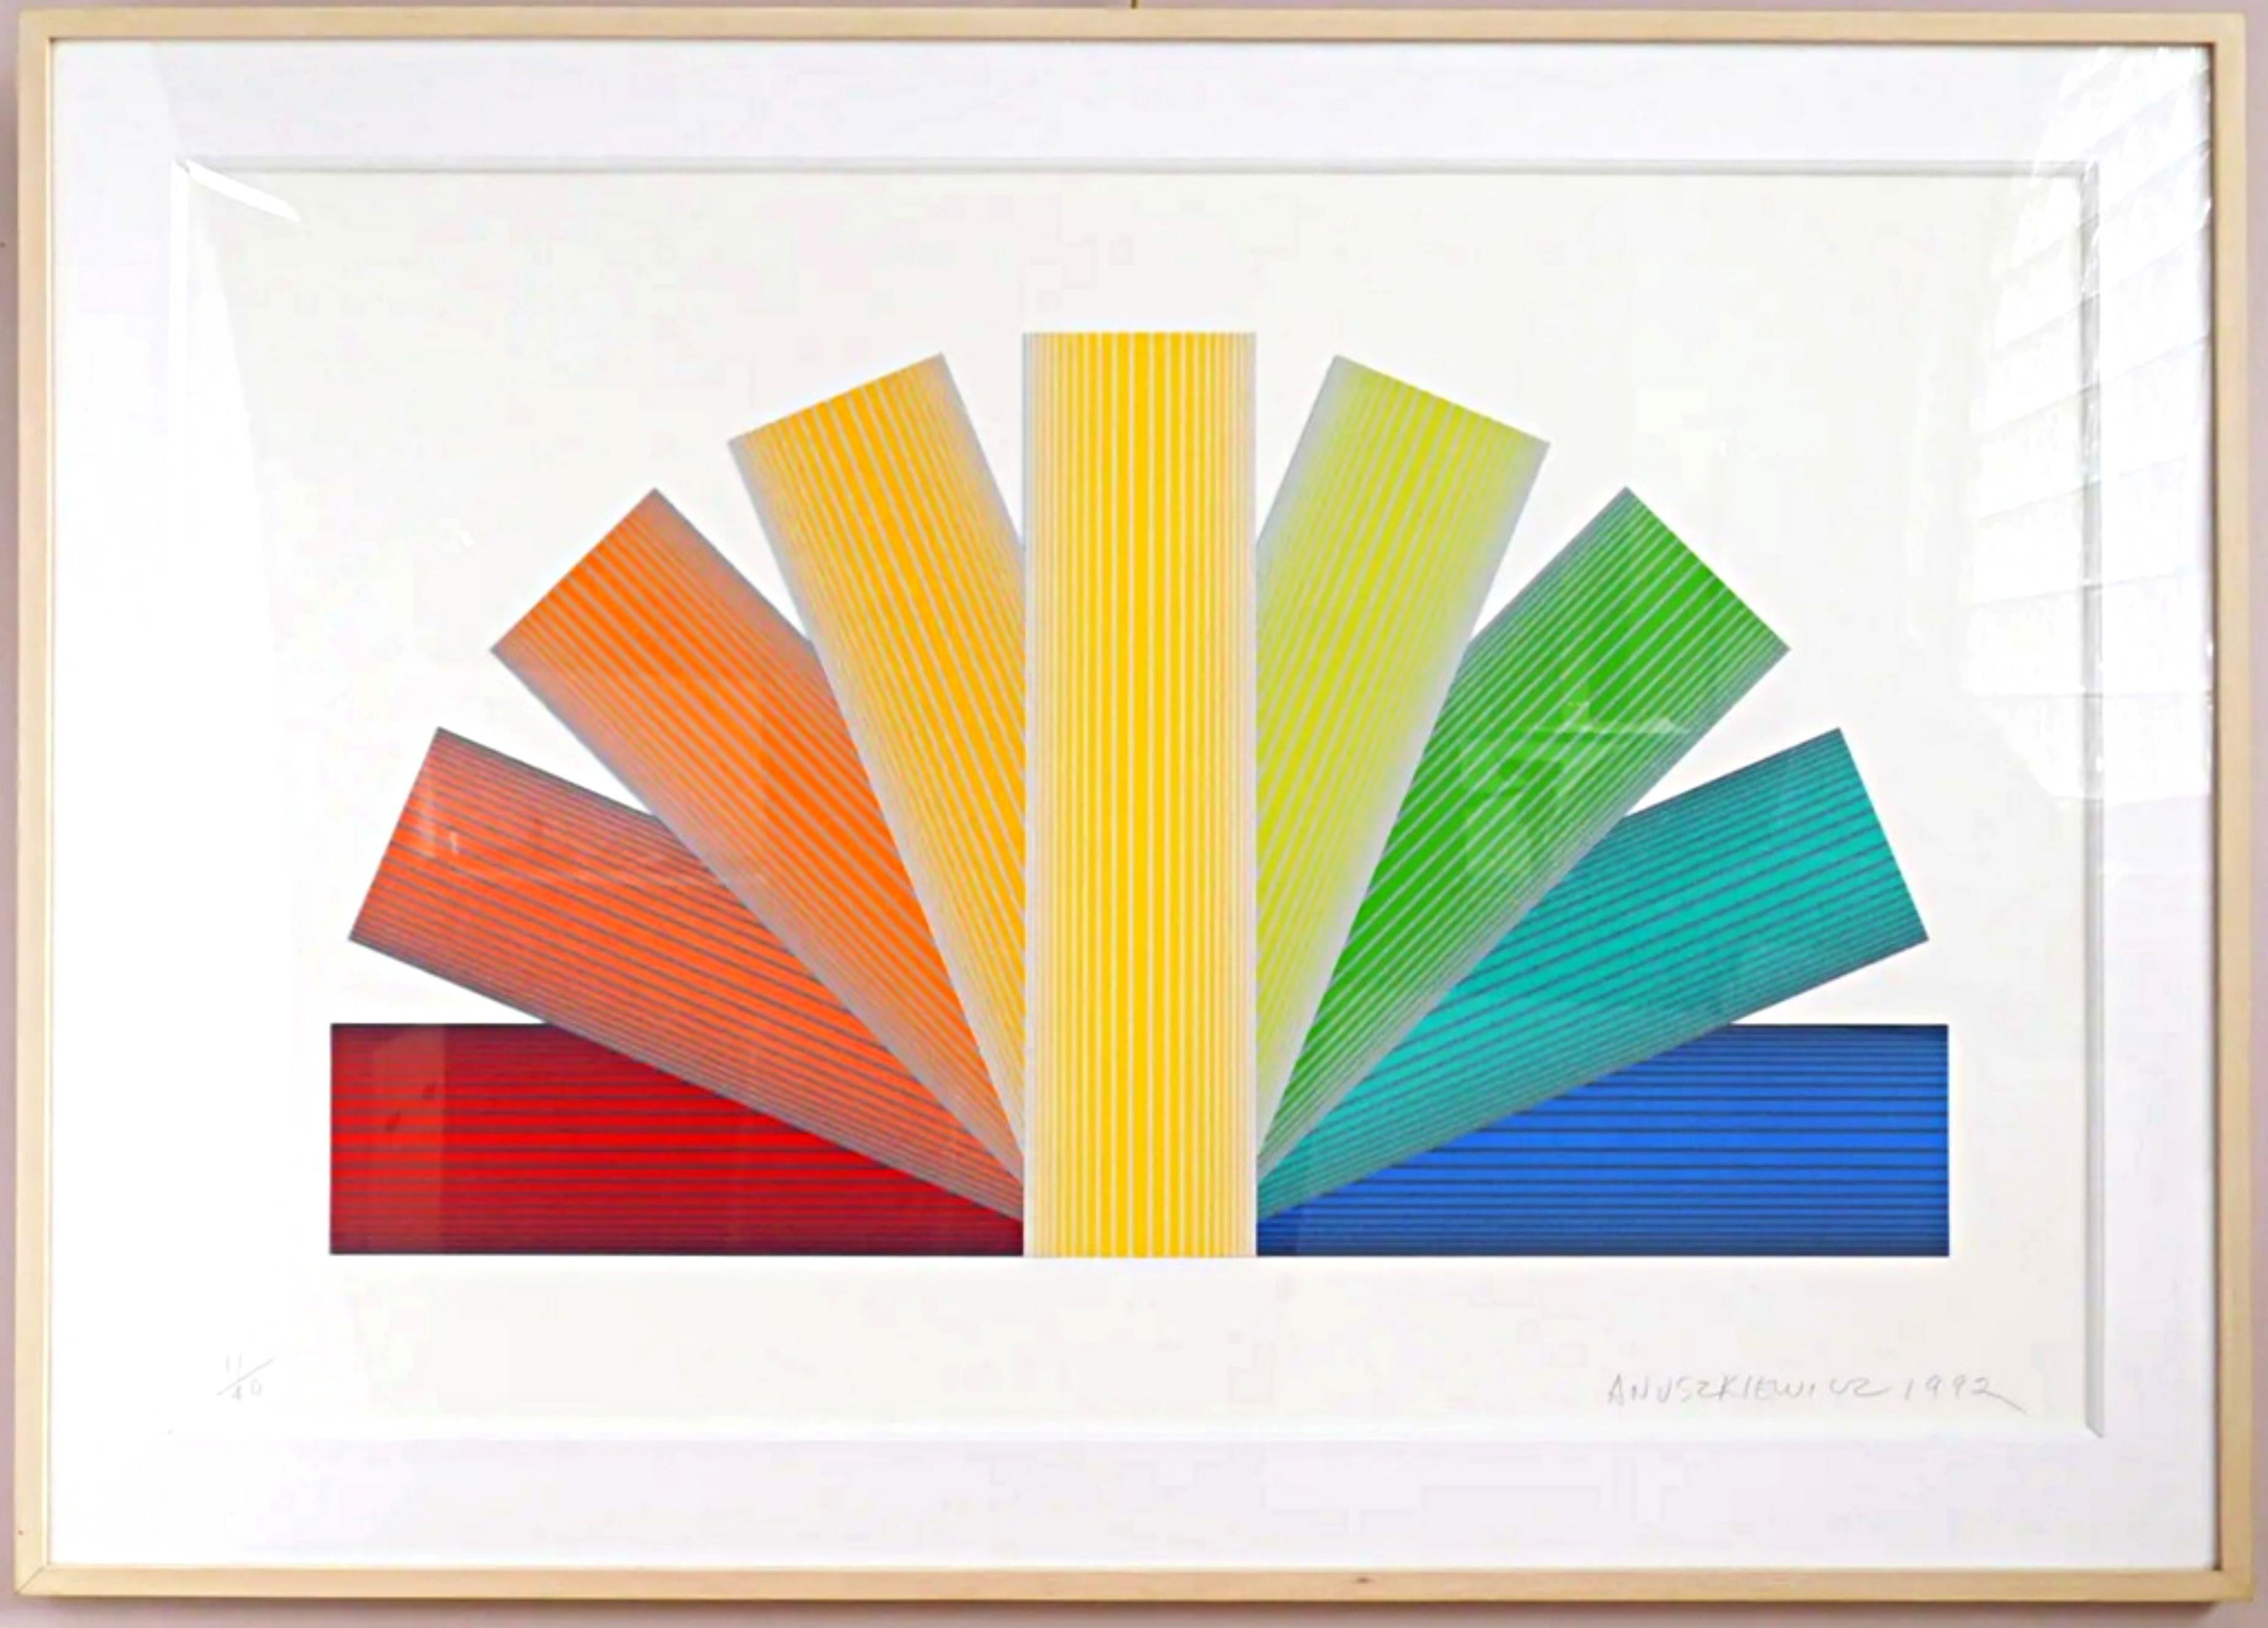 Grey tinted Rainbow (Geometric Abstraction) dazzling Op Art framed assemblage - Mixed Media Art by Richard Anuszkiewicz